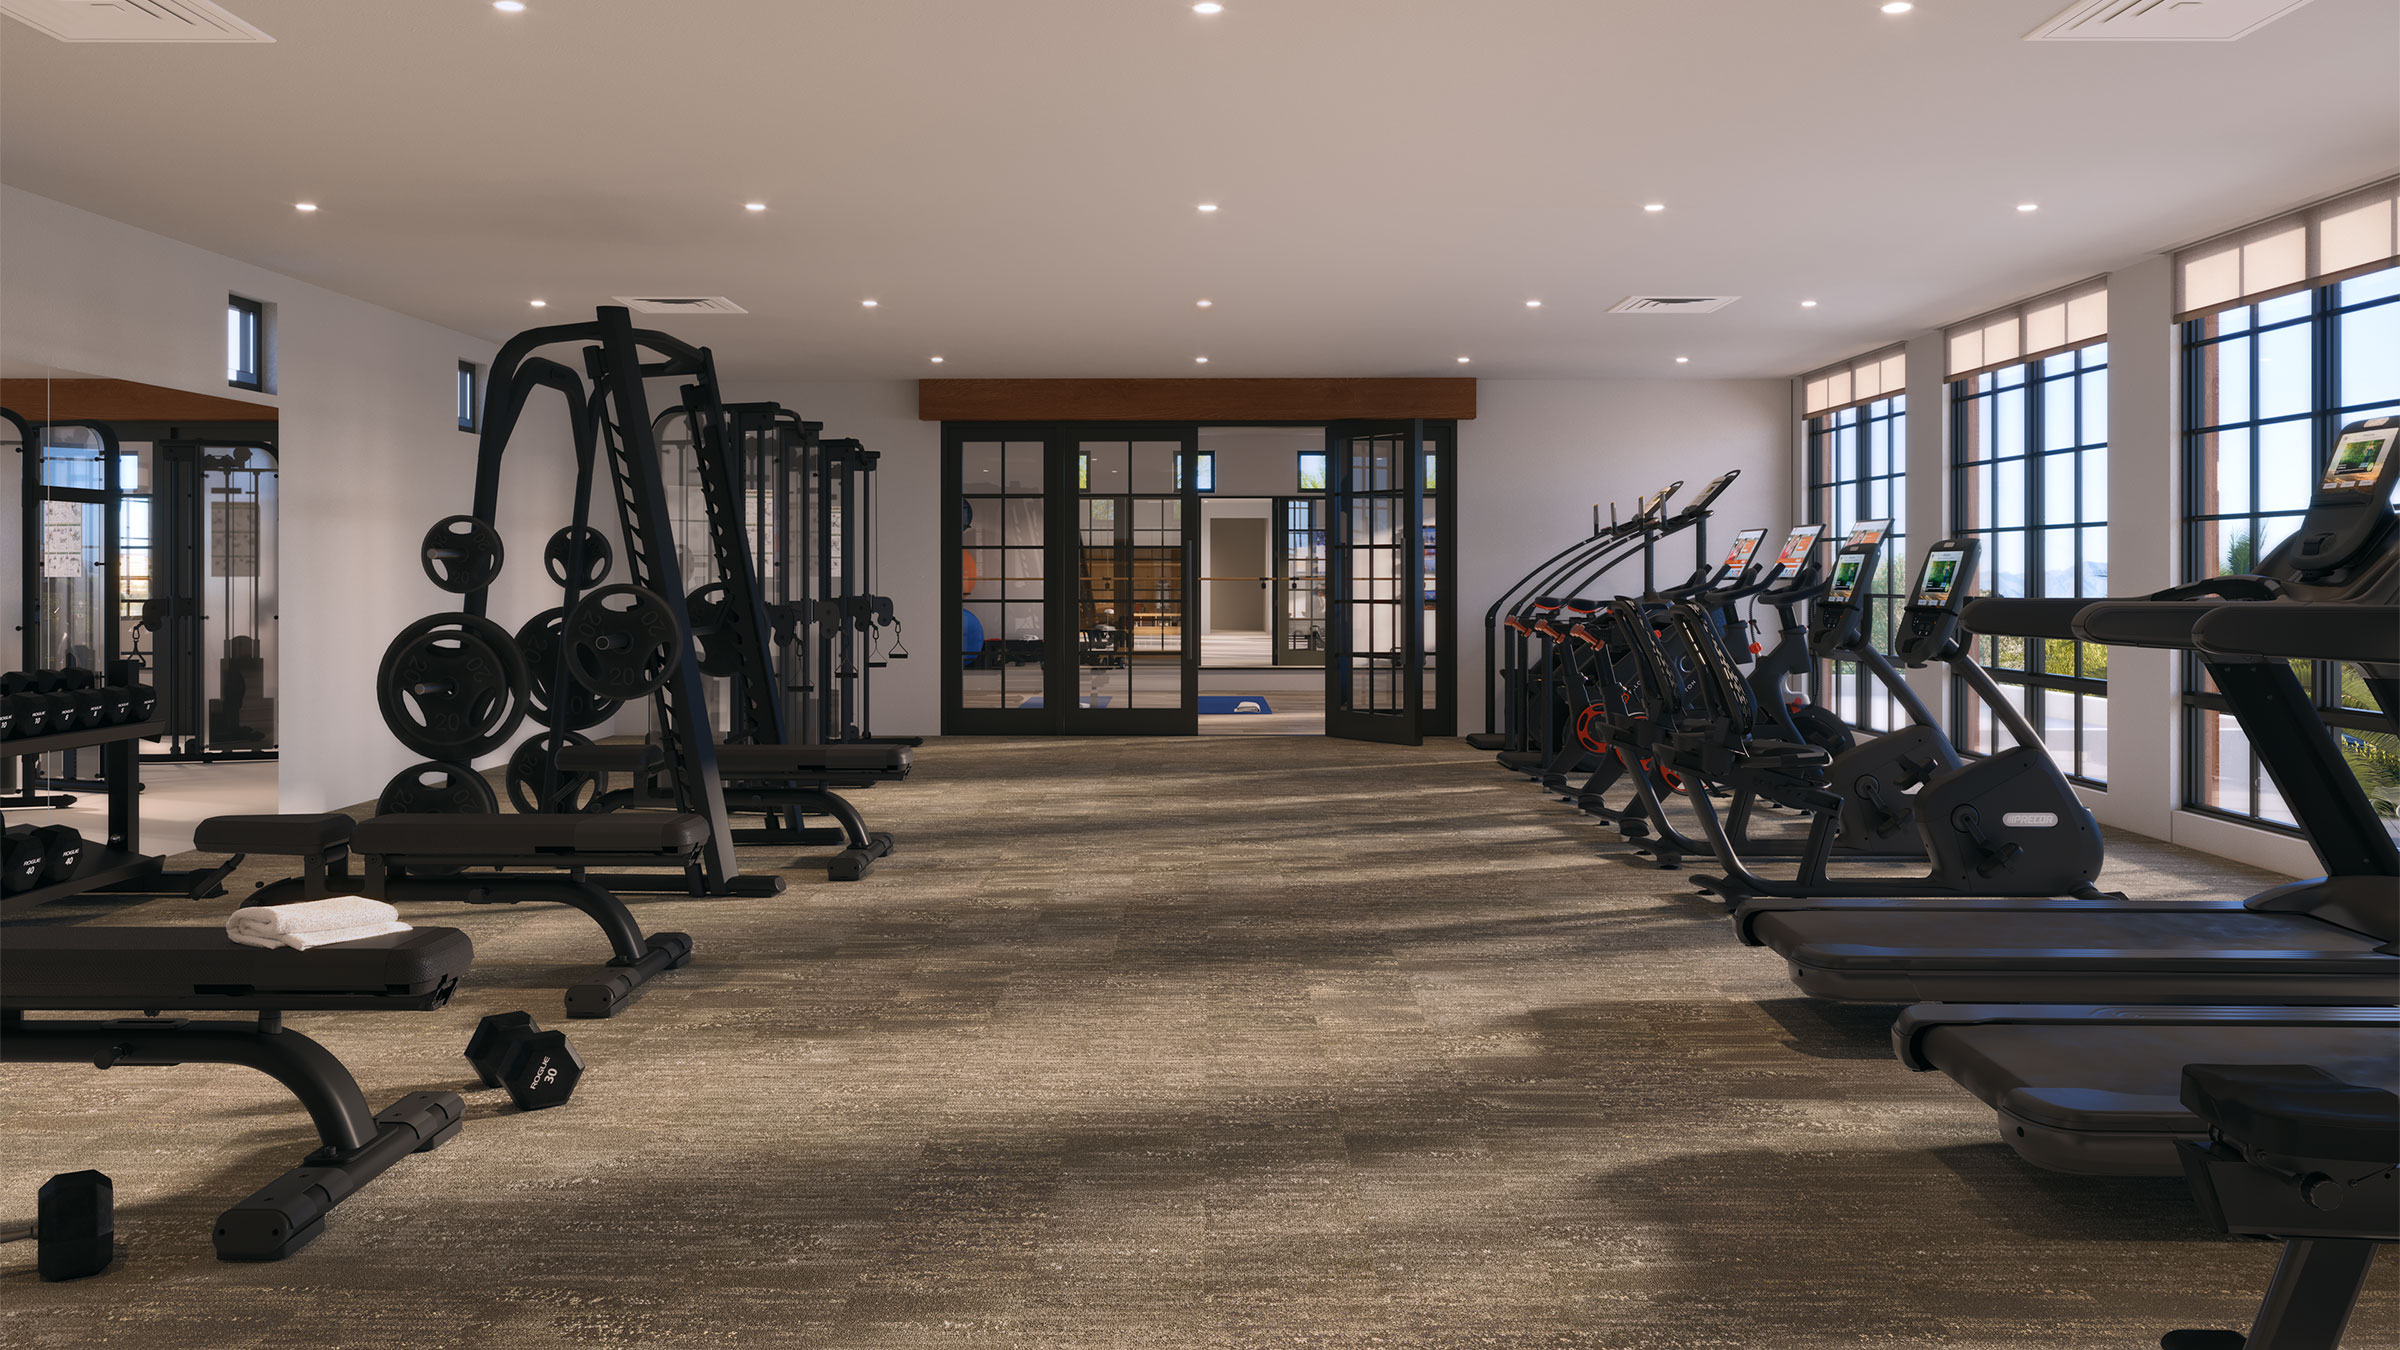 The fitness room offers state-of-the-art equipment and stunning views.